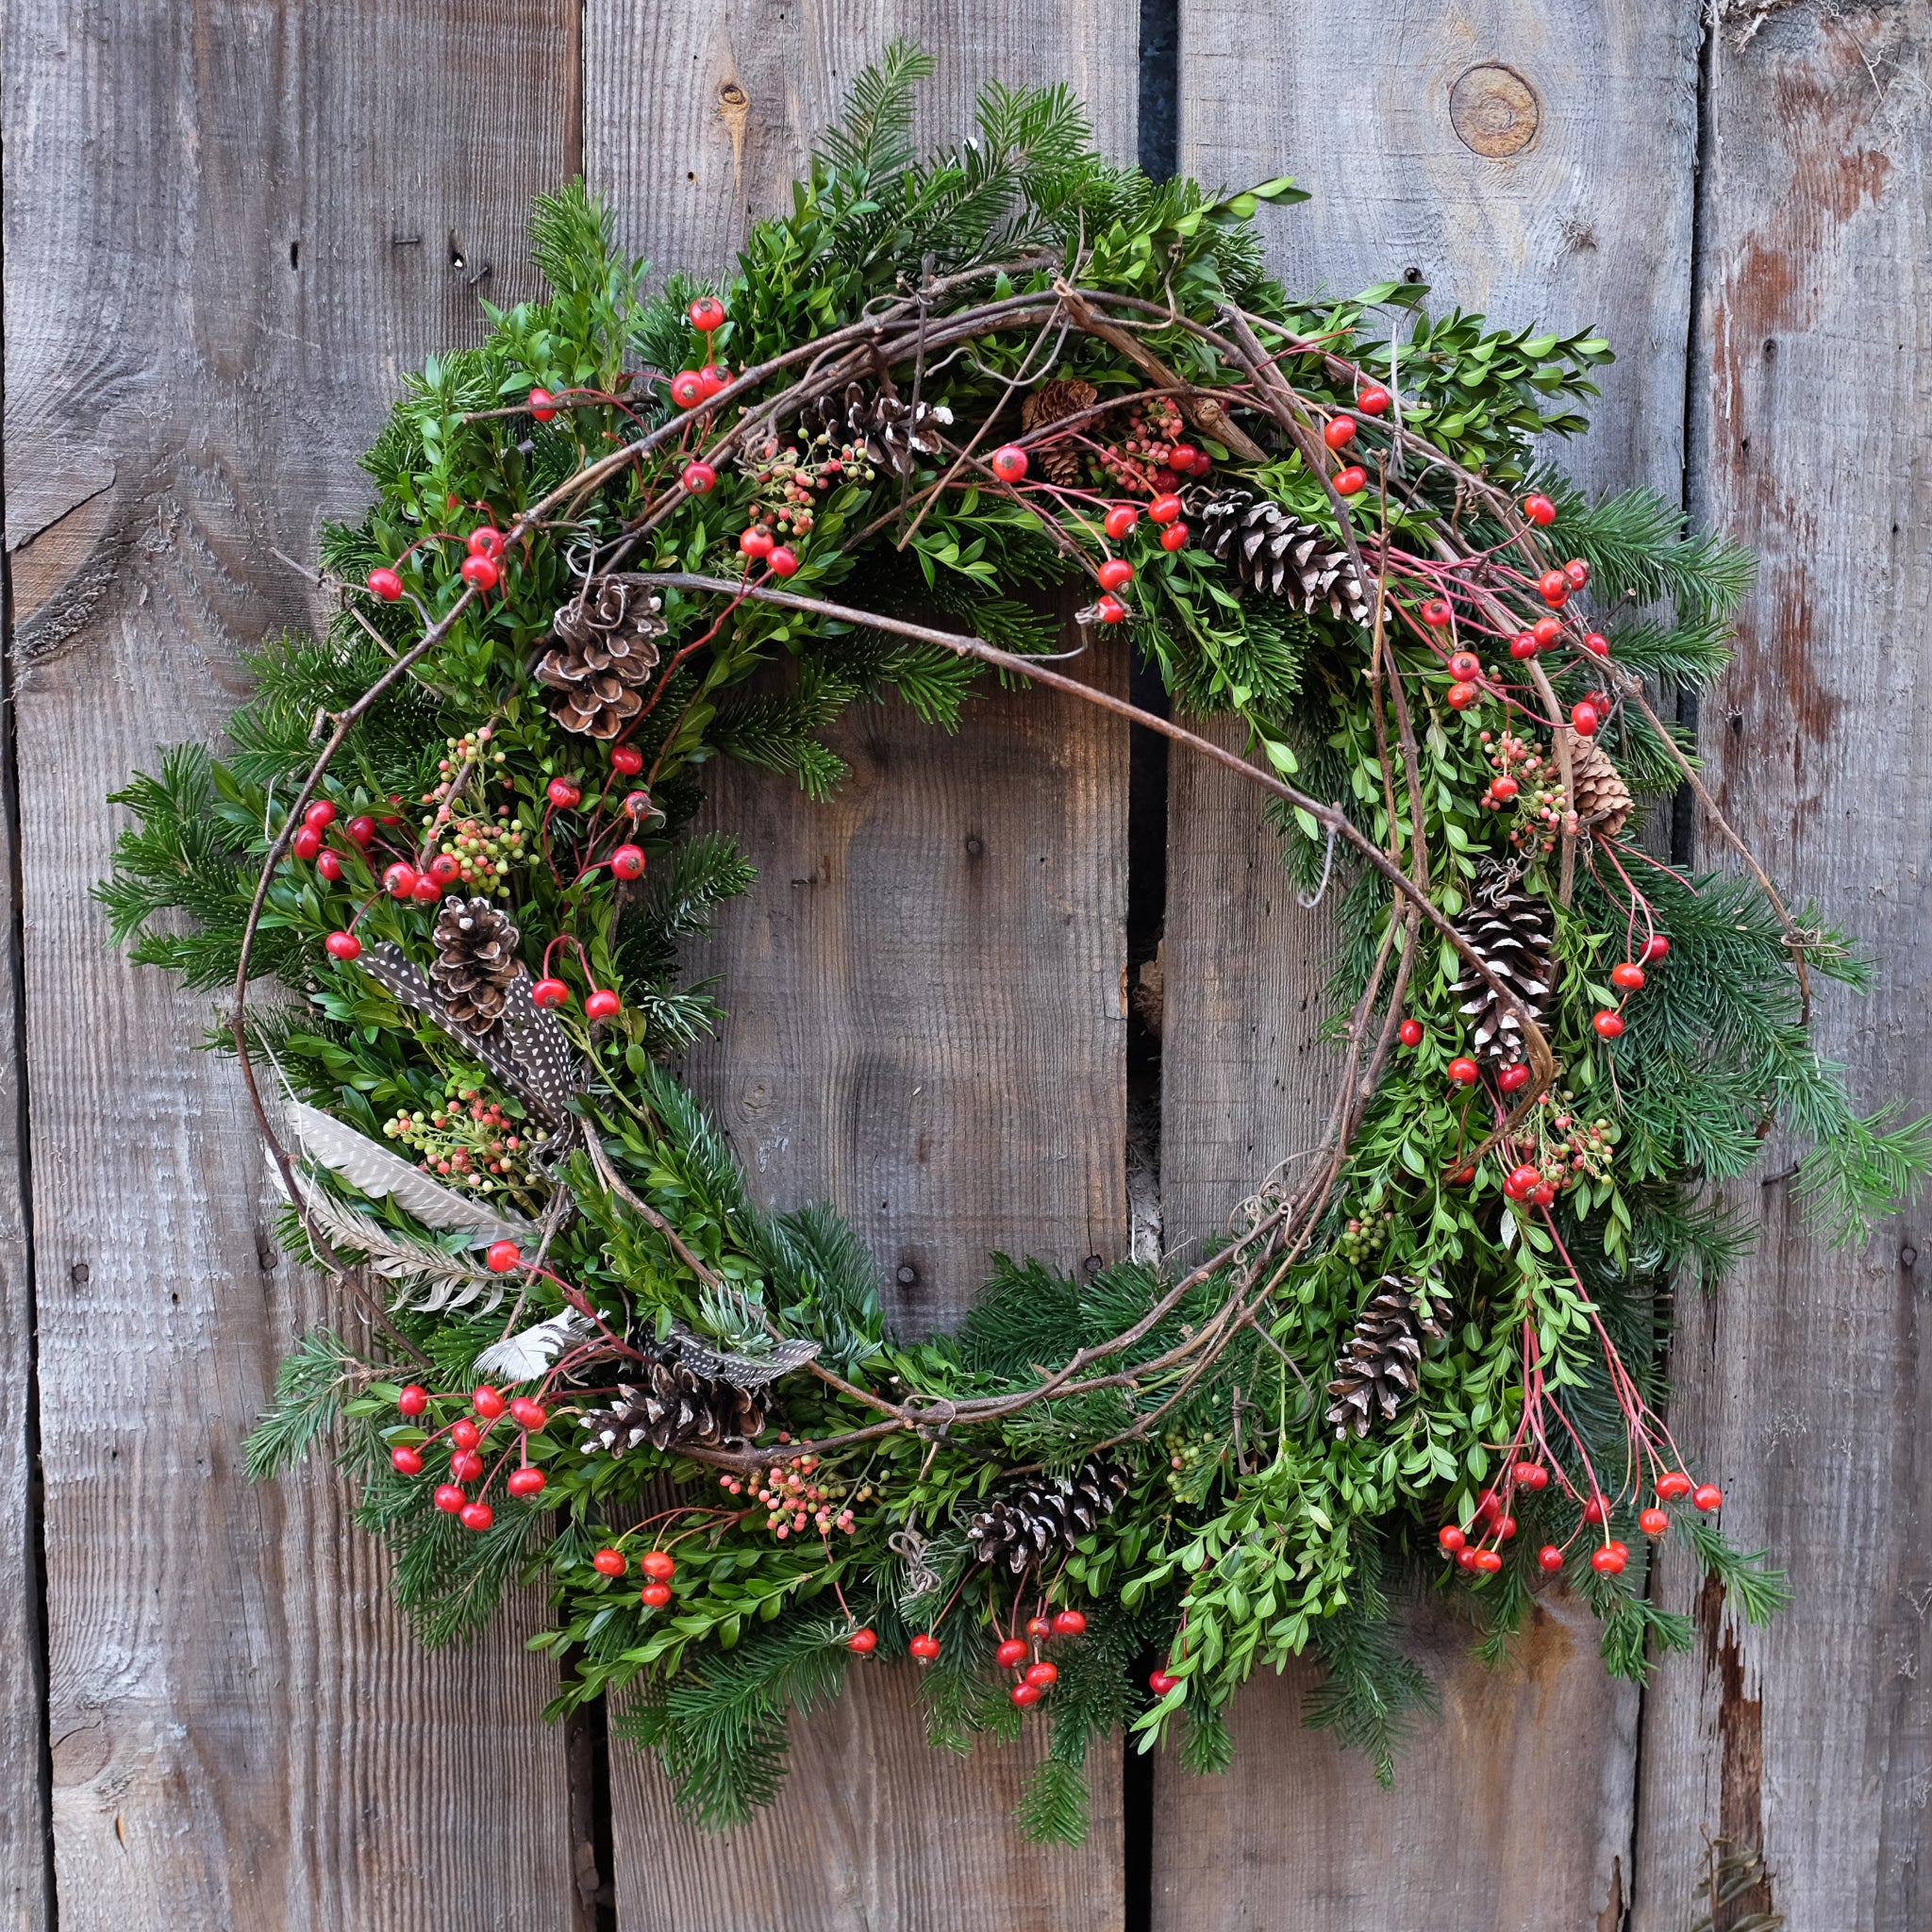 mixed evergreen wreath with pinecones, winter berries, feathers, and winding stick accents by Michler's